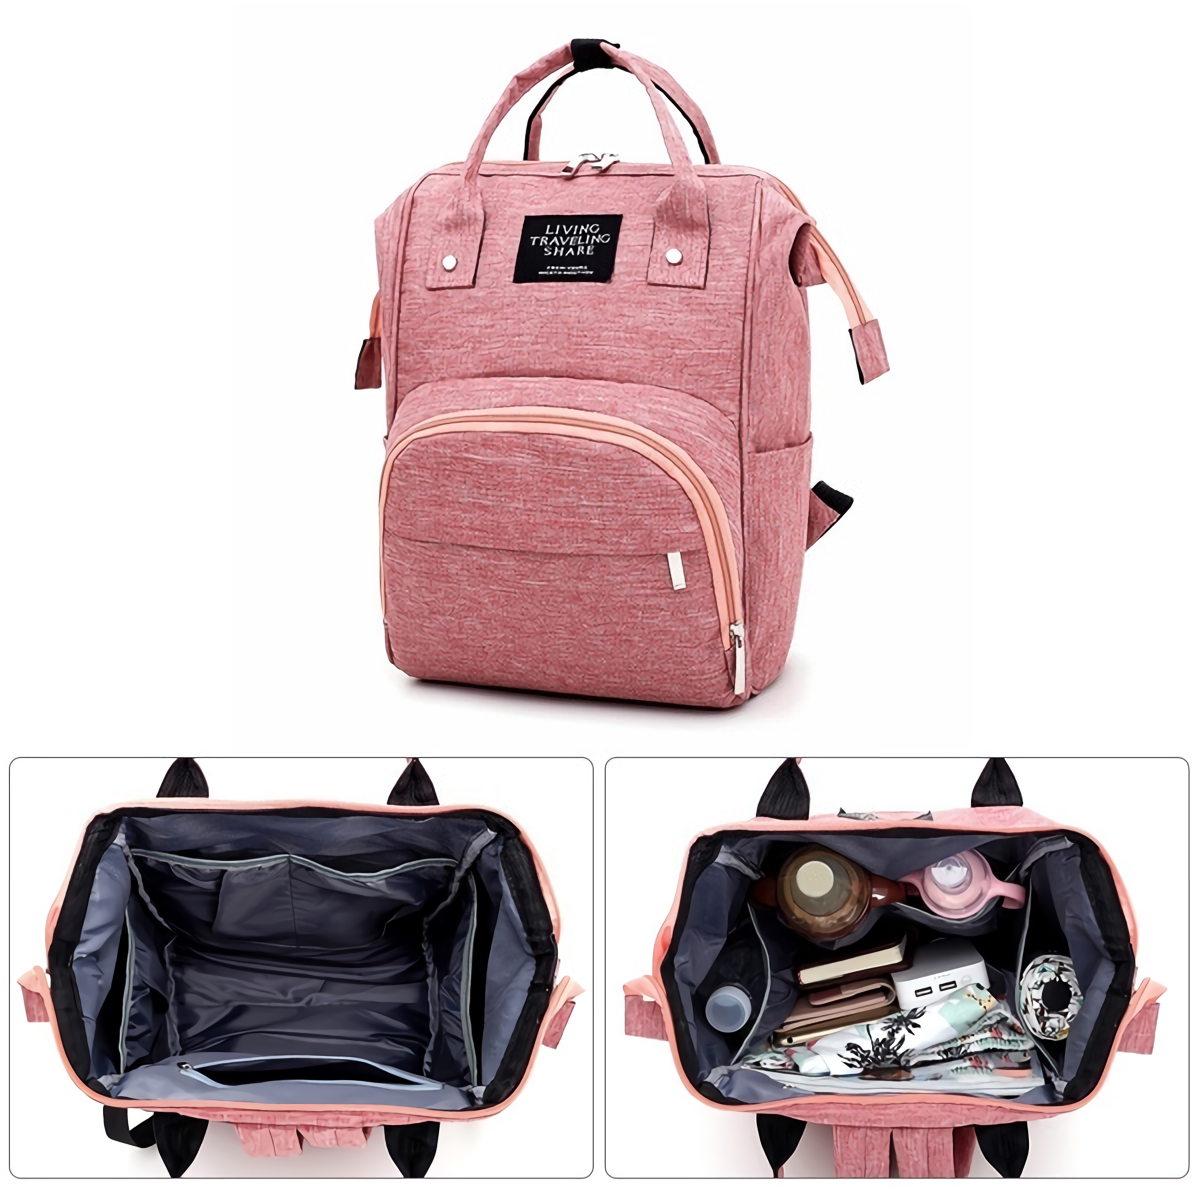 New-Fashion-Large-Travel-Mommy-Backpacks-Solid-Color-Oxford-Cloth-Baby-Nursing-Nappy-Bags-Waterproof-1631399